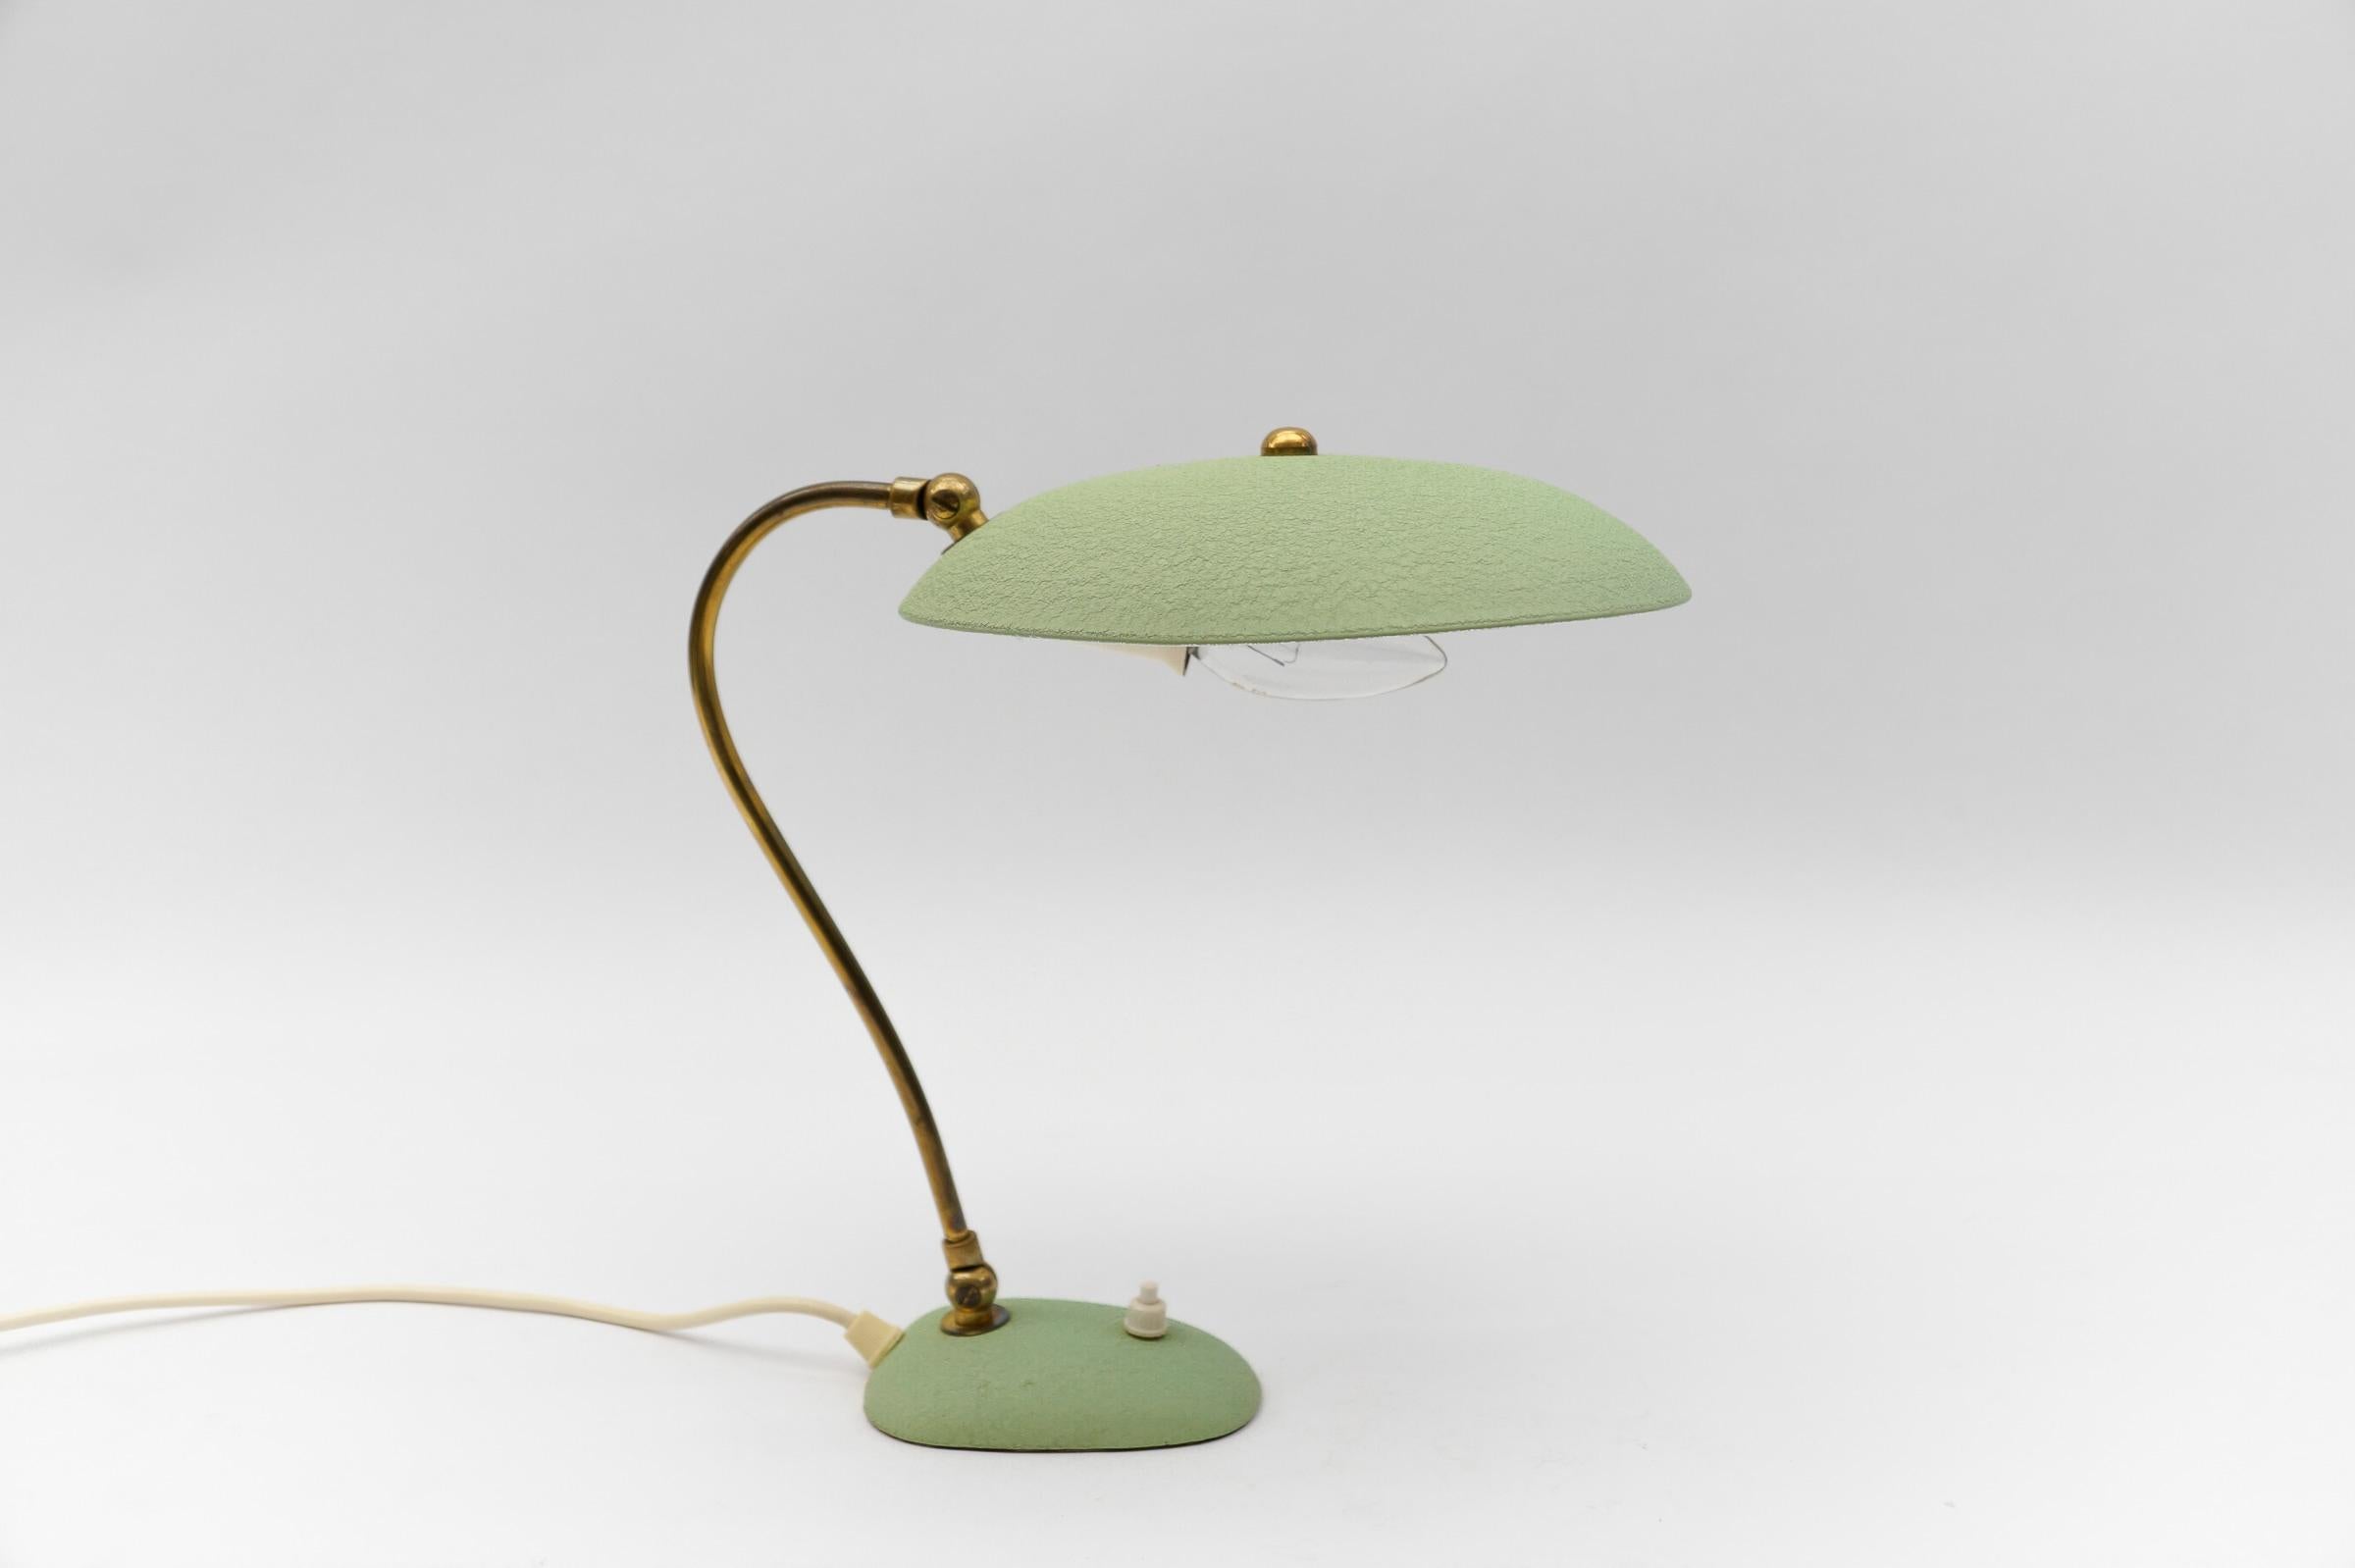 Lovely Mid-Century Modern Table Lamp in Brass, 1950s

Dimension
Height: 11.81 in (30 cm)
Width: 9.05 in (23 cm)
Depth: 18.50 in (47 cm)

The lamp needs 1 x E14 / E15 Edison screw fit bulb, is wired, and in working condition. It runs both on 110 /